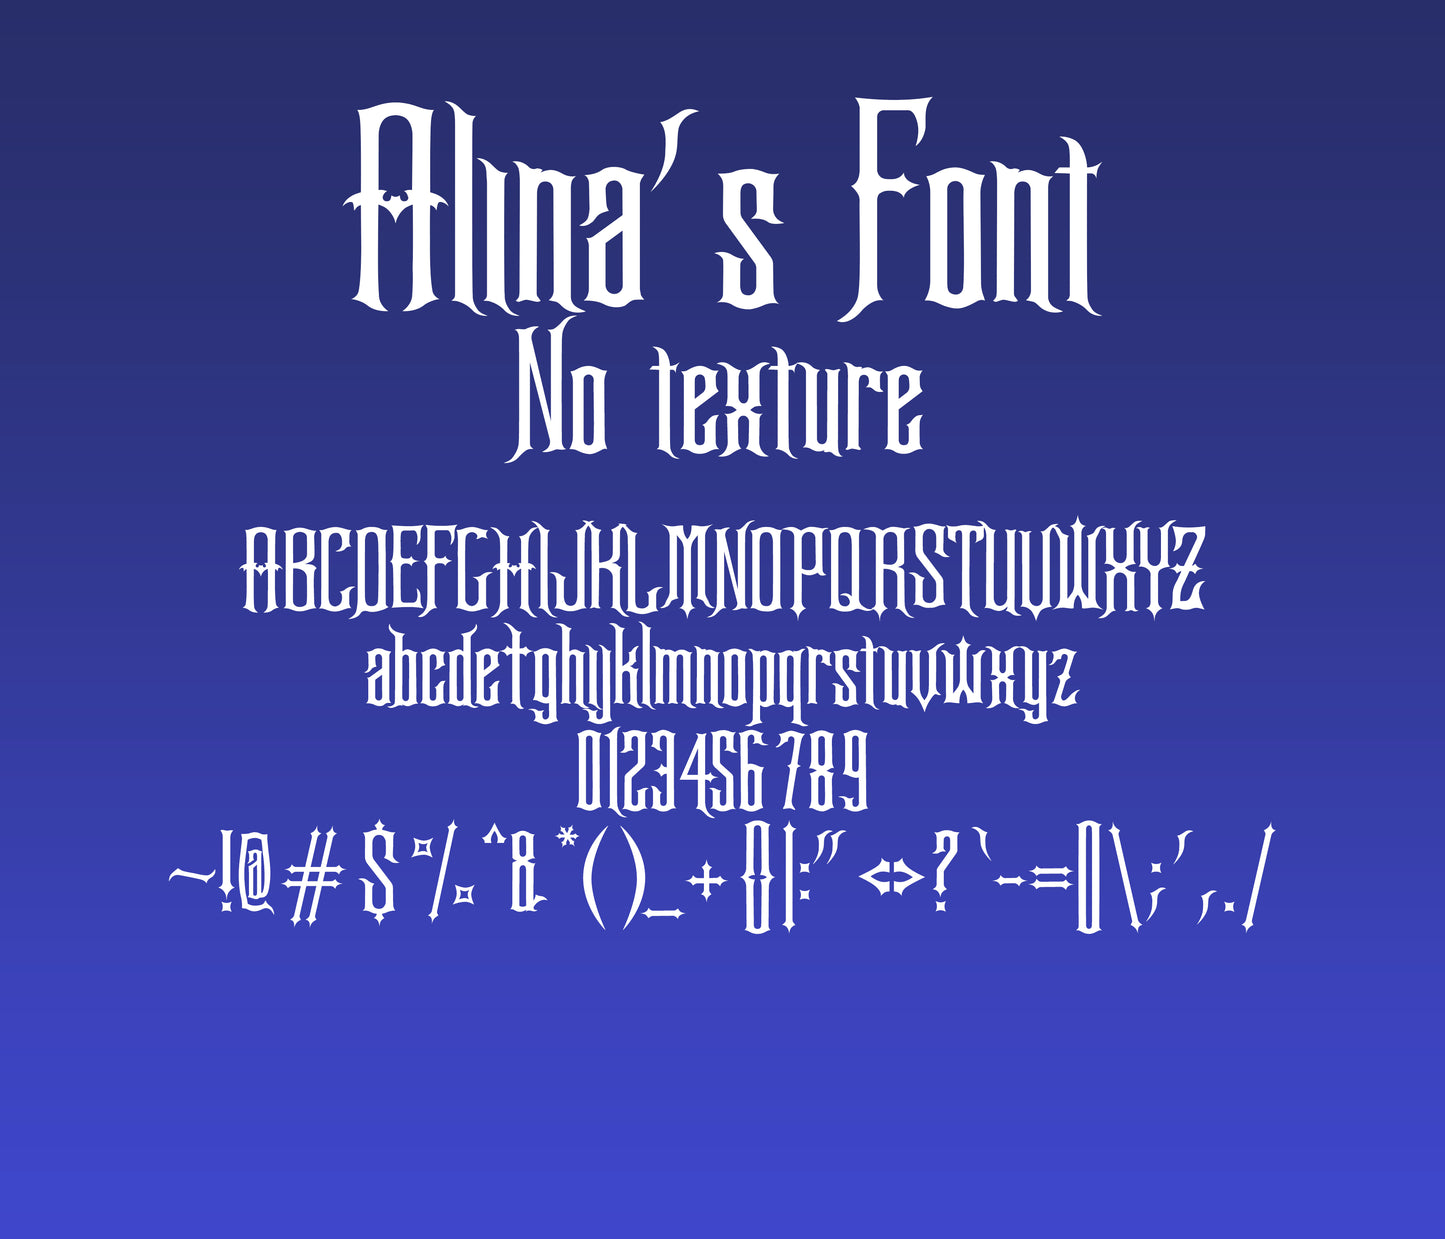 The Haunted Mansion Textured Font